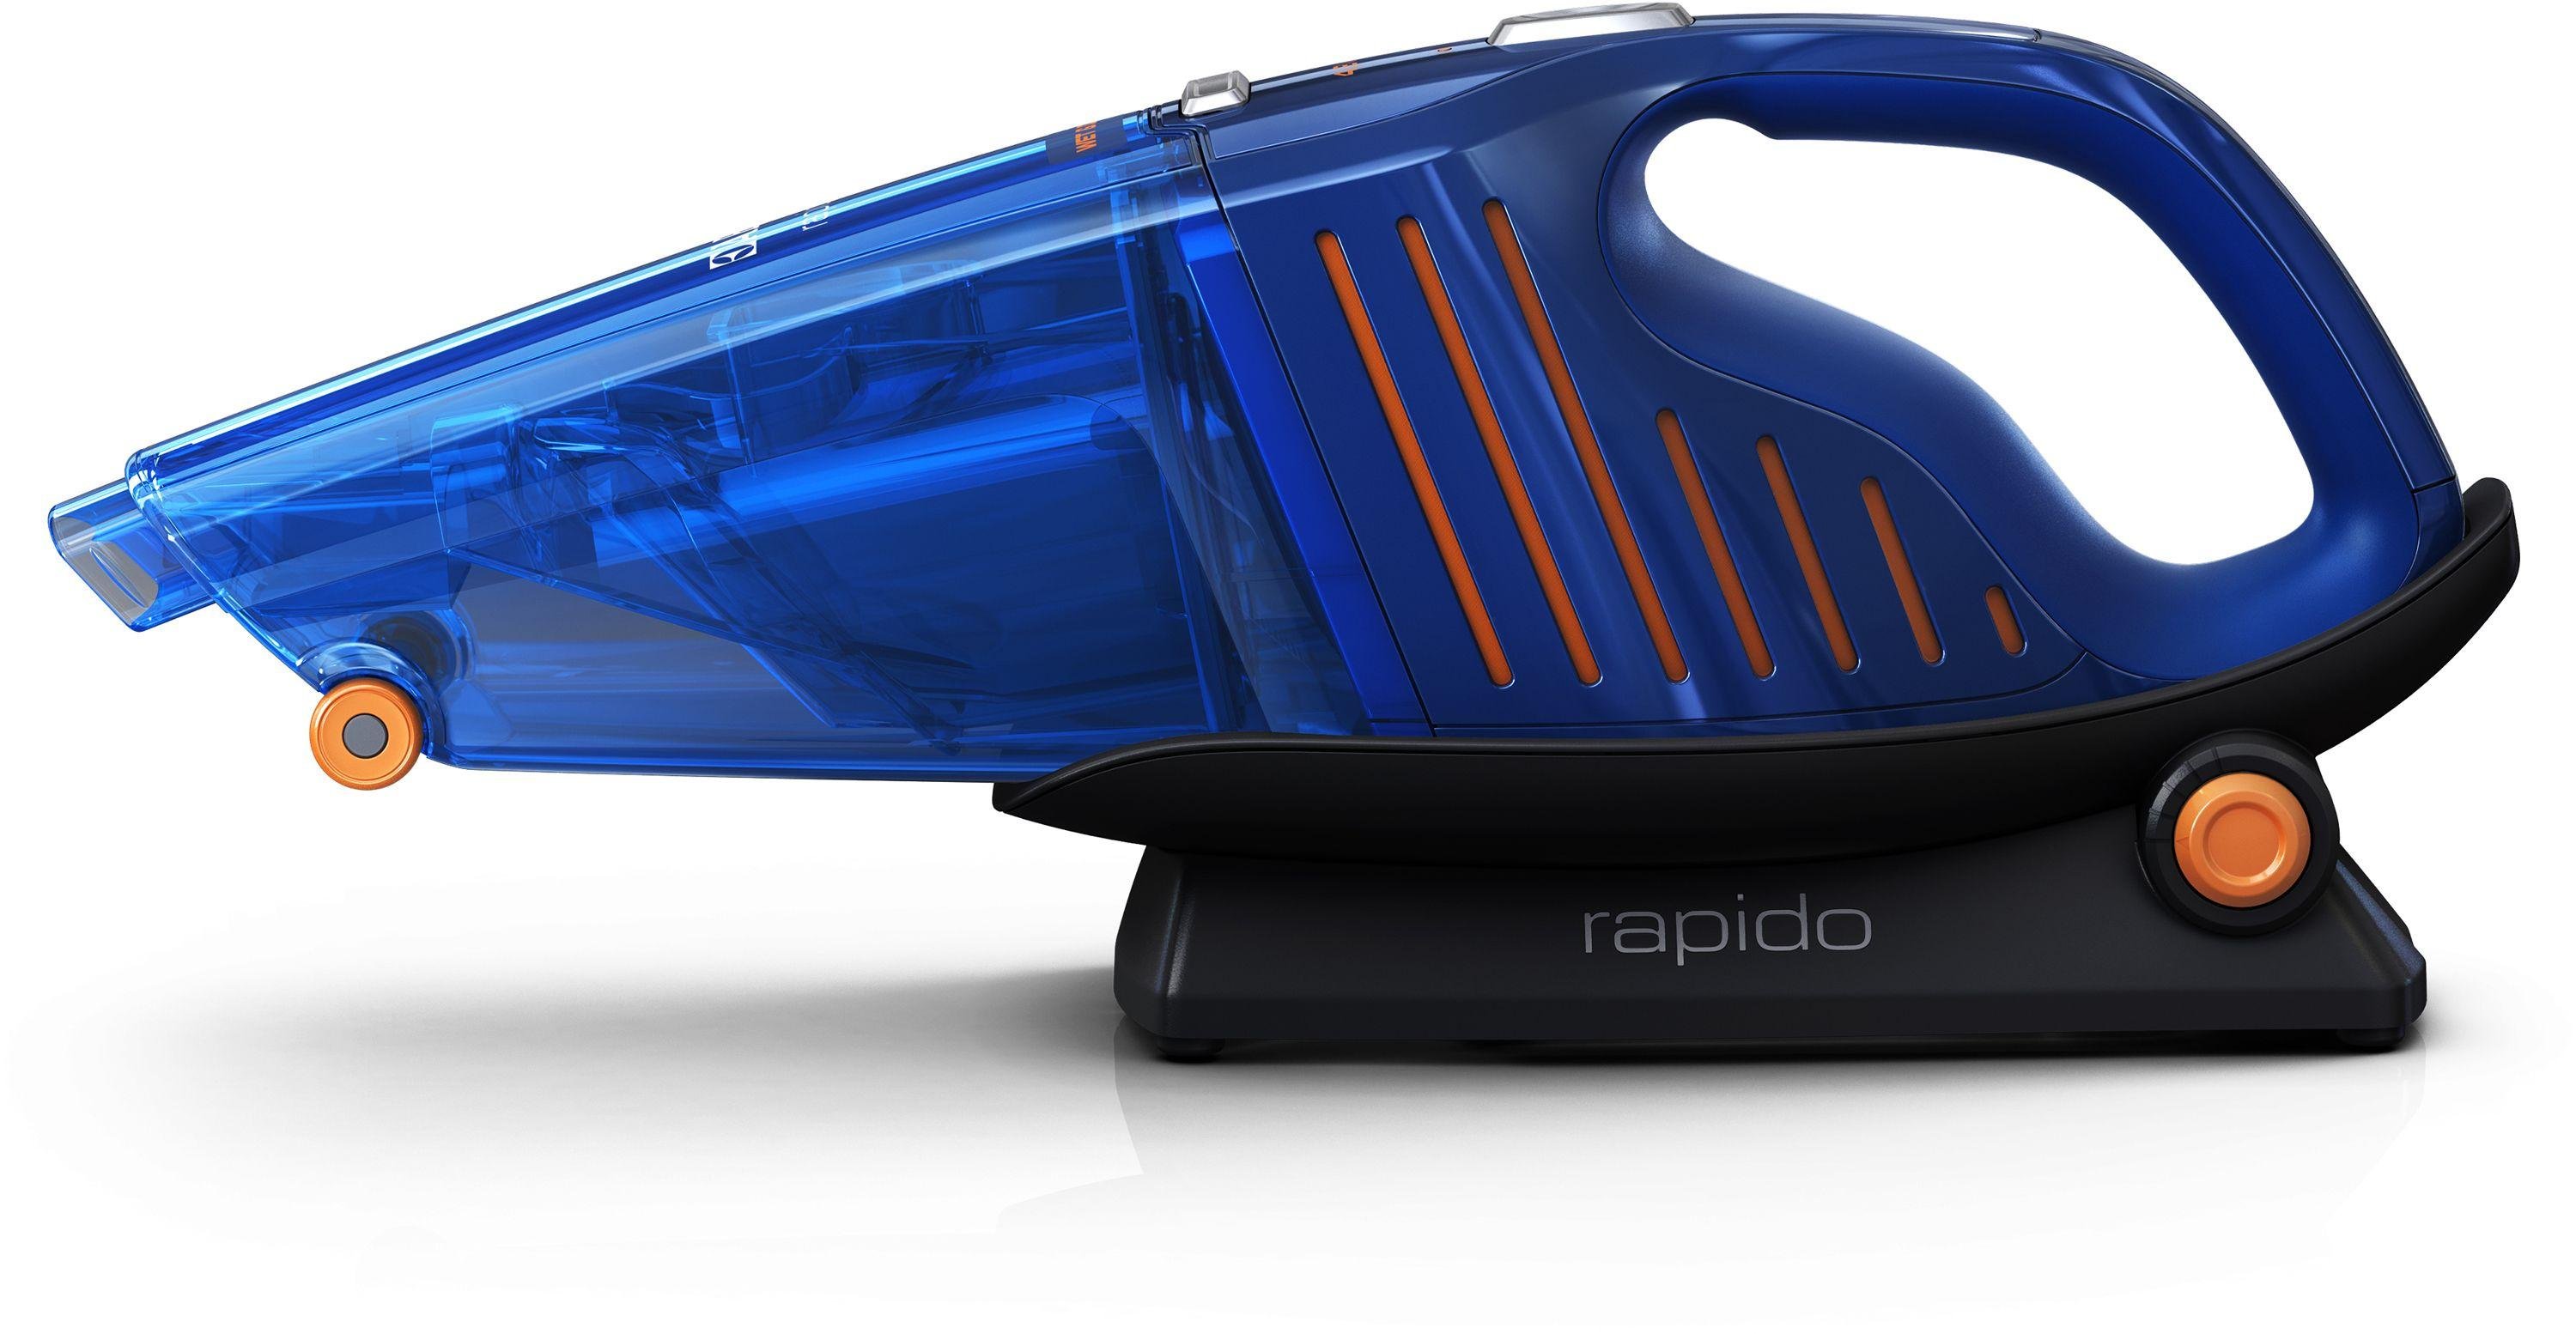 AEG - AG5104WD Rapido Wet and Dry - Cordless - Handheld Cleaner Review